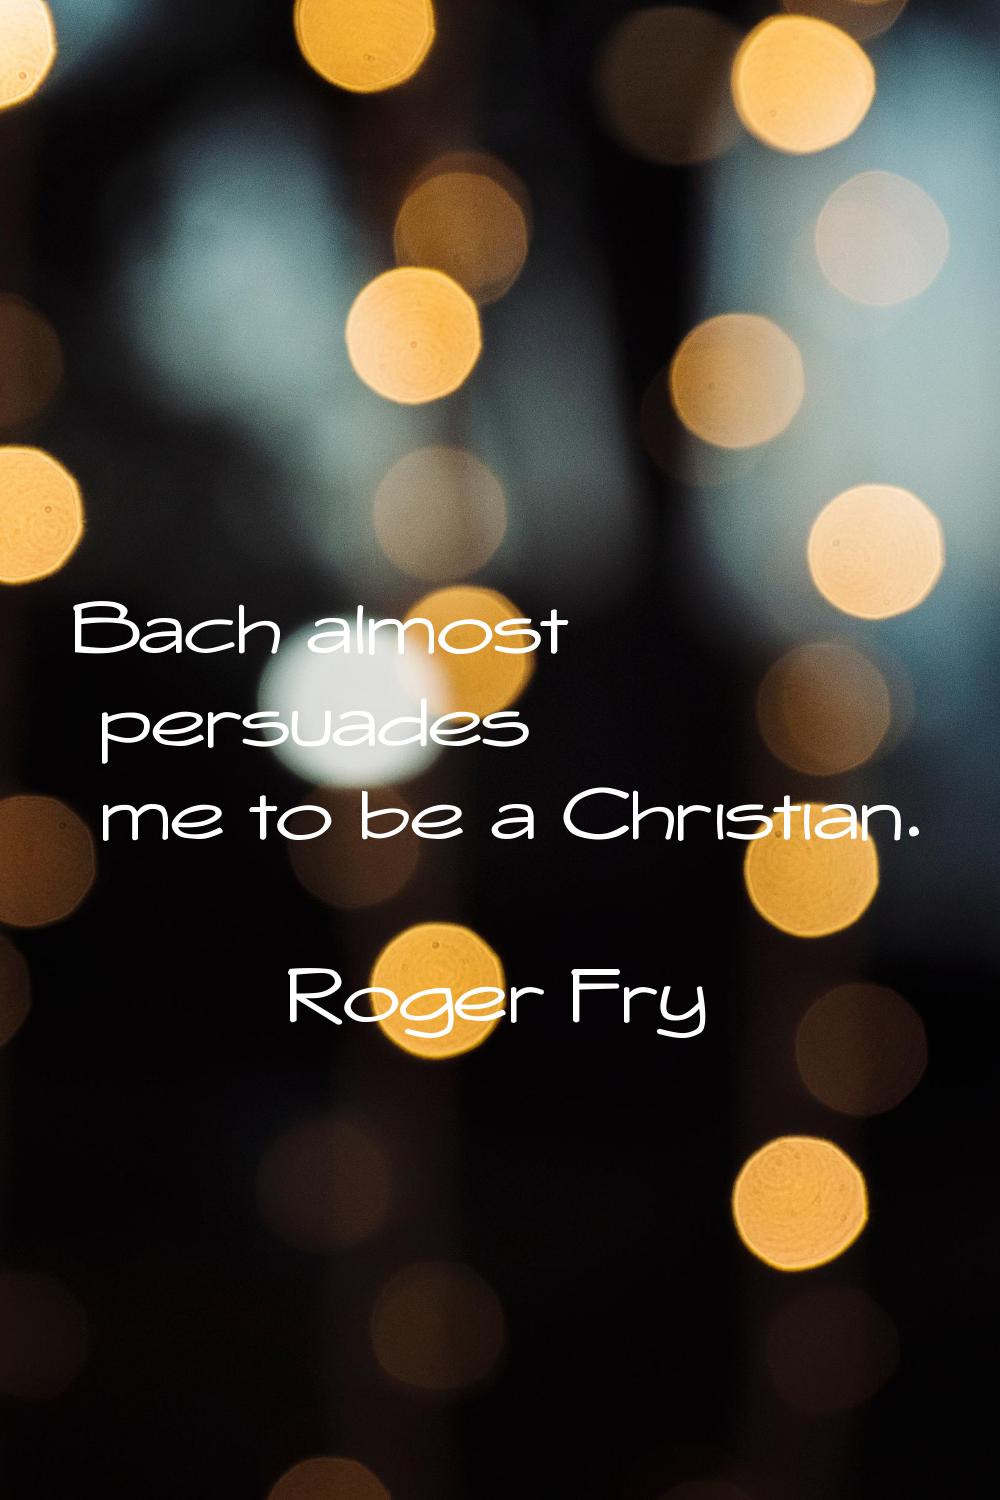 Bach almost persuades me to be a Christian.